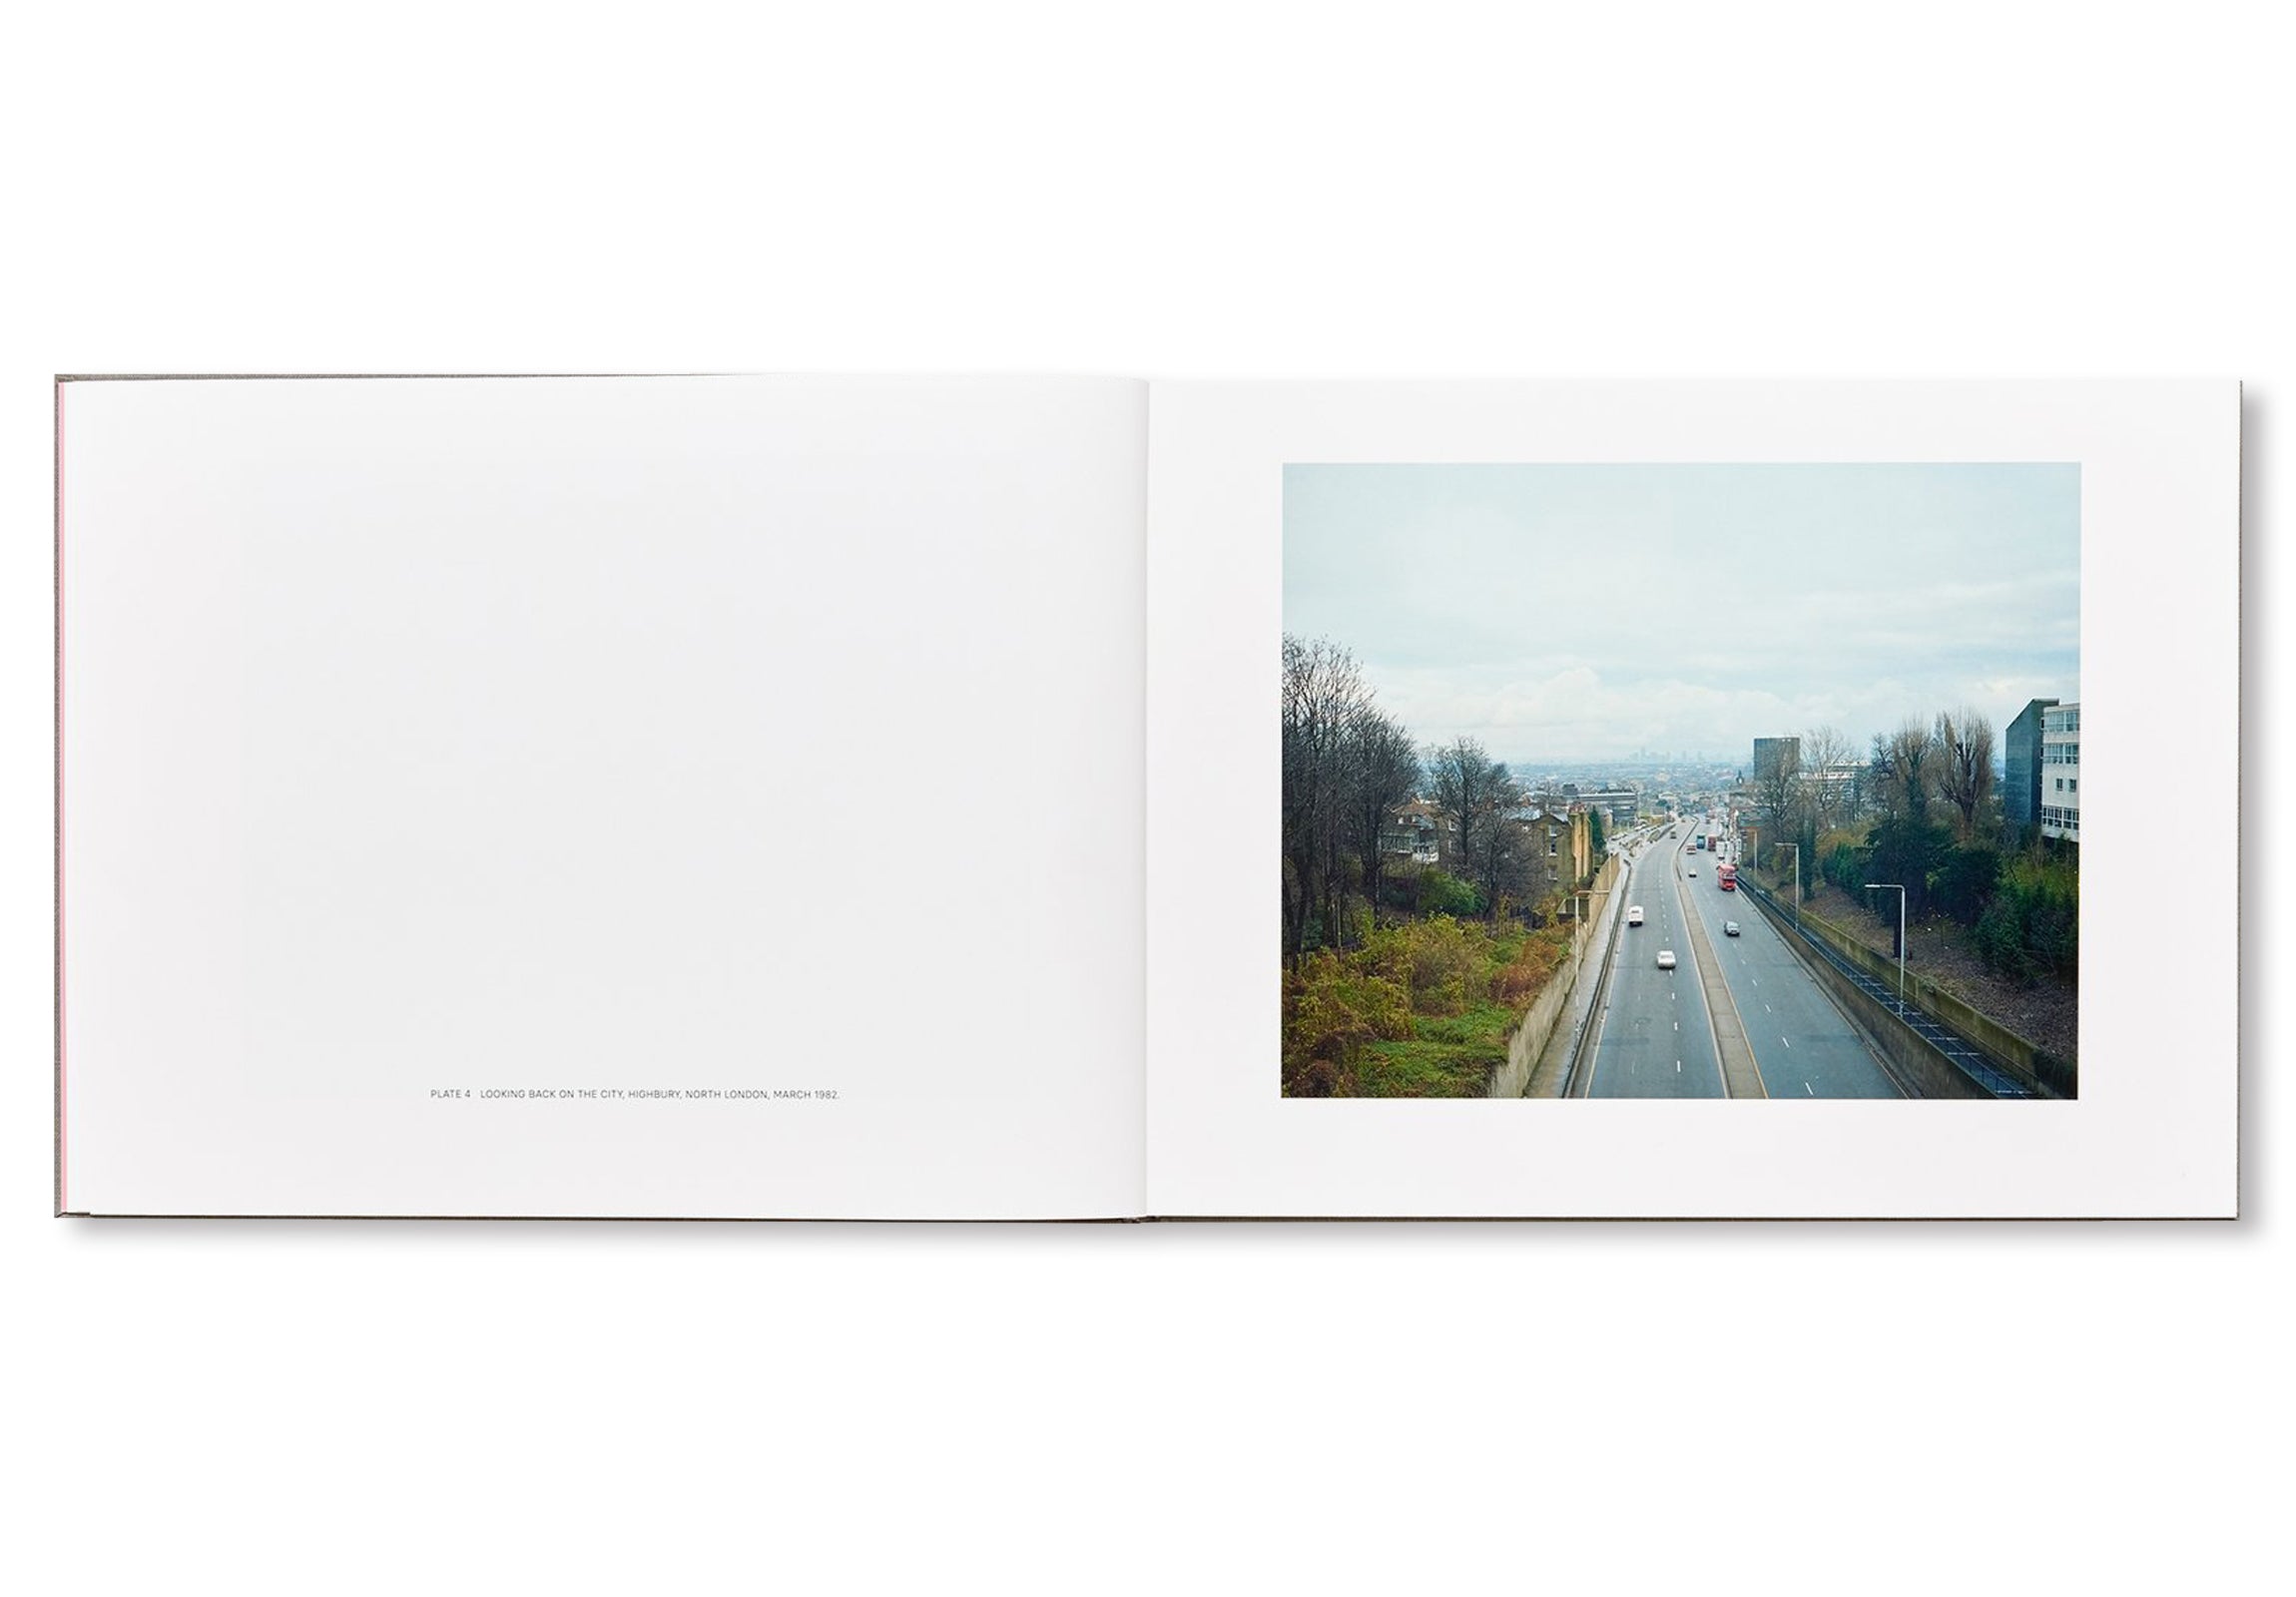 A1 - THE GREAT NORTH ROAD by Paul Graham [FIRST EDITION, SECOND PRINTING]